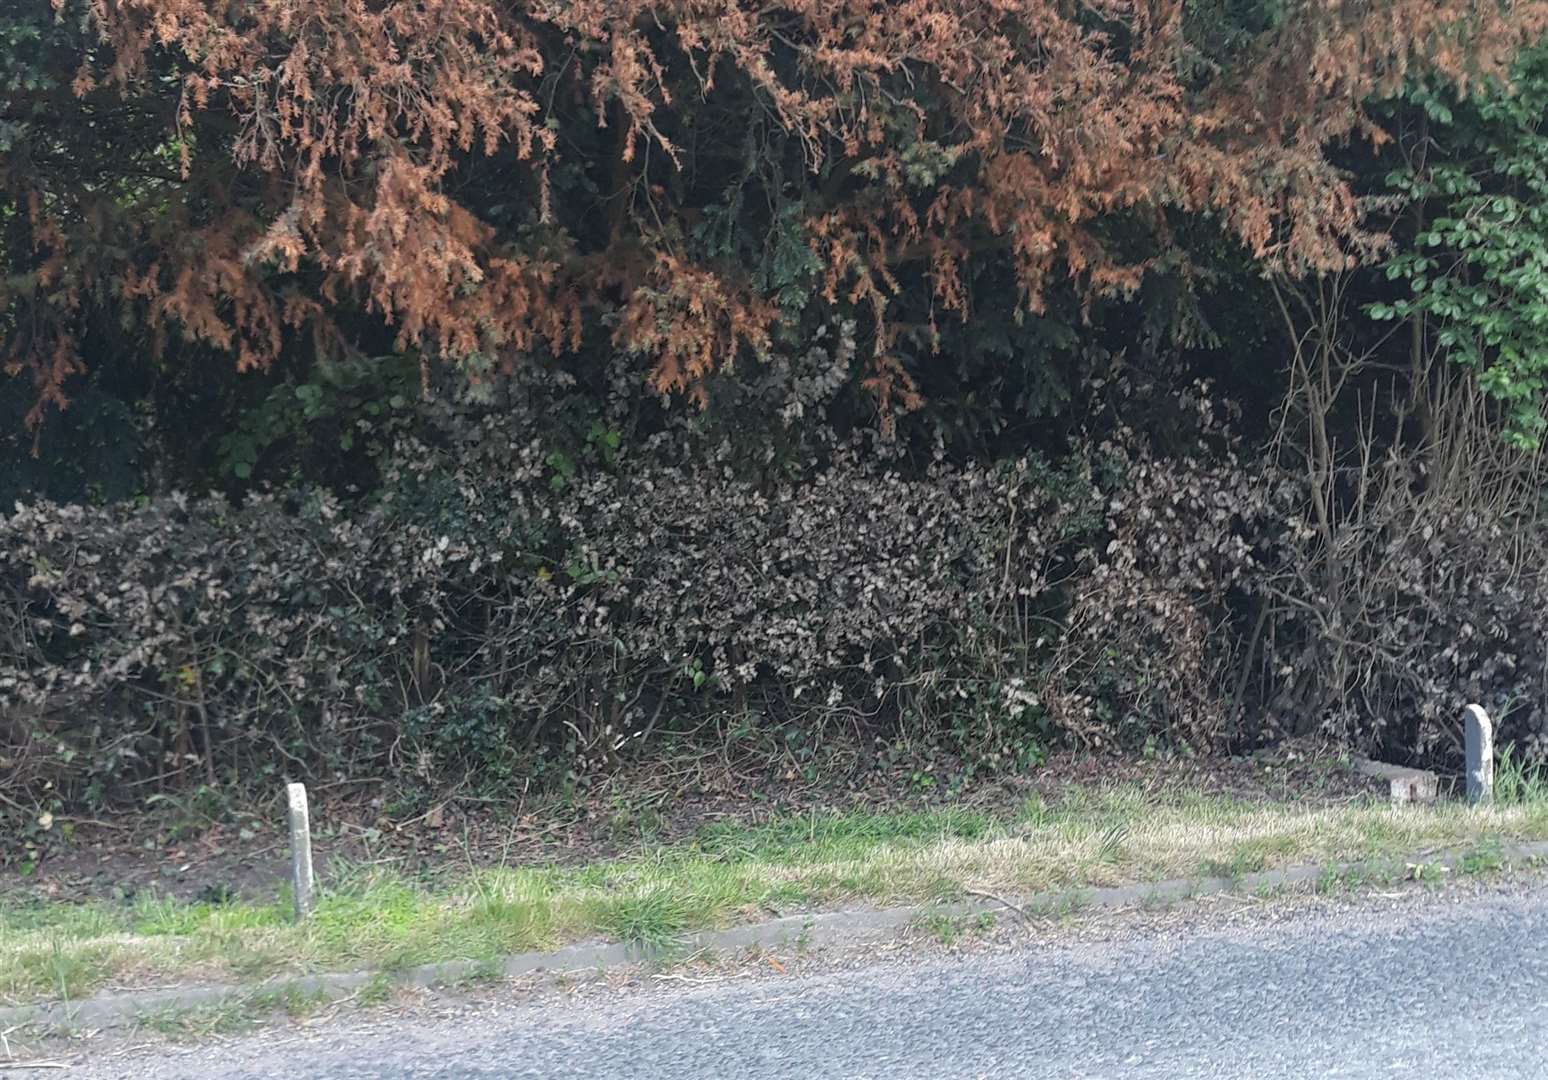 Peter Hall's Holly hedge in front of his house has died due to polluted water (11288125)